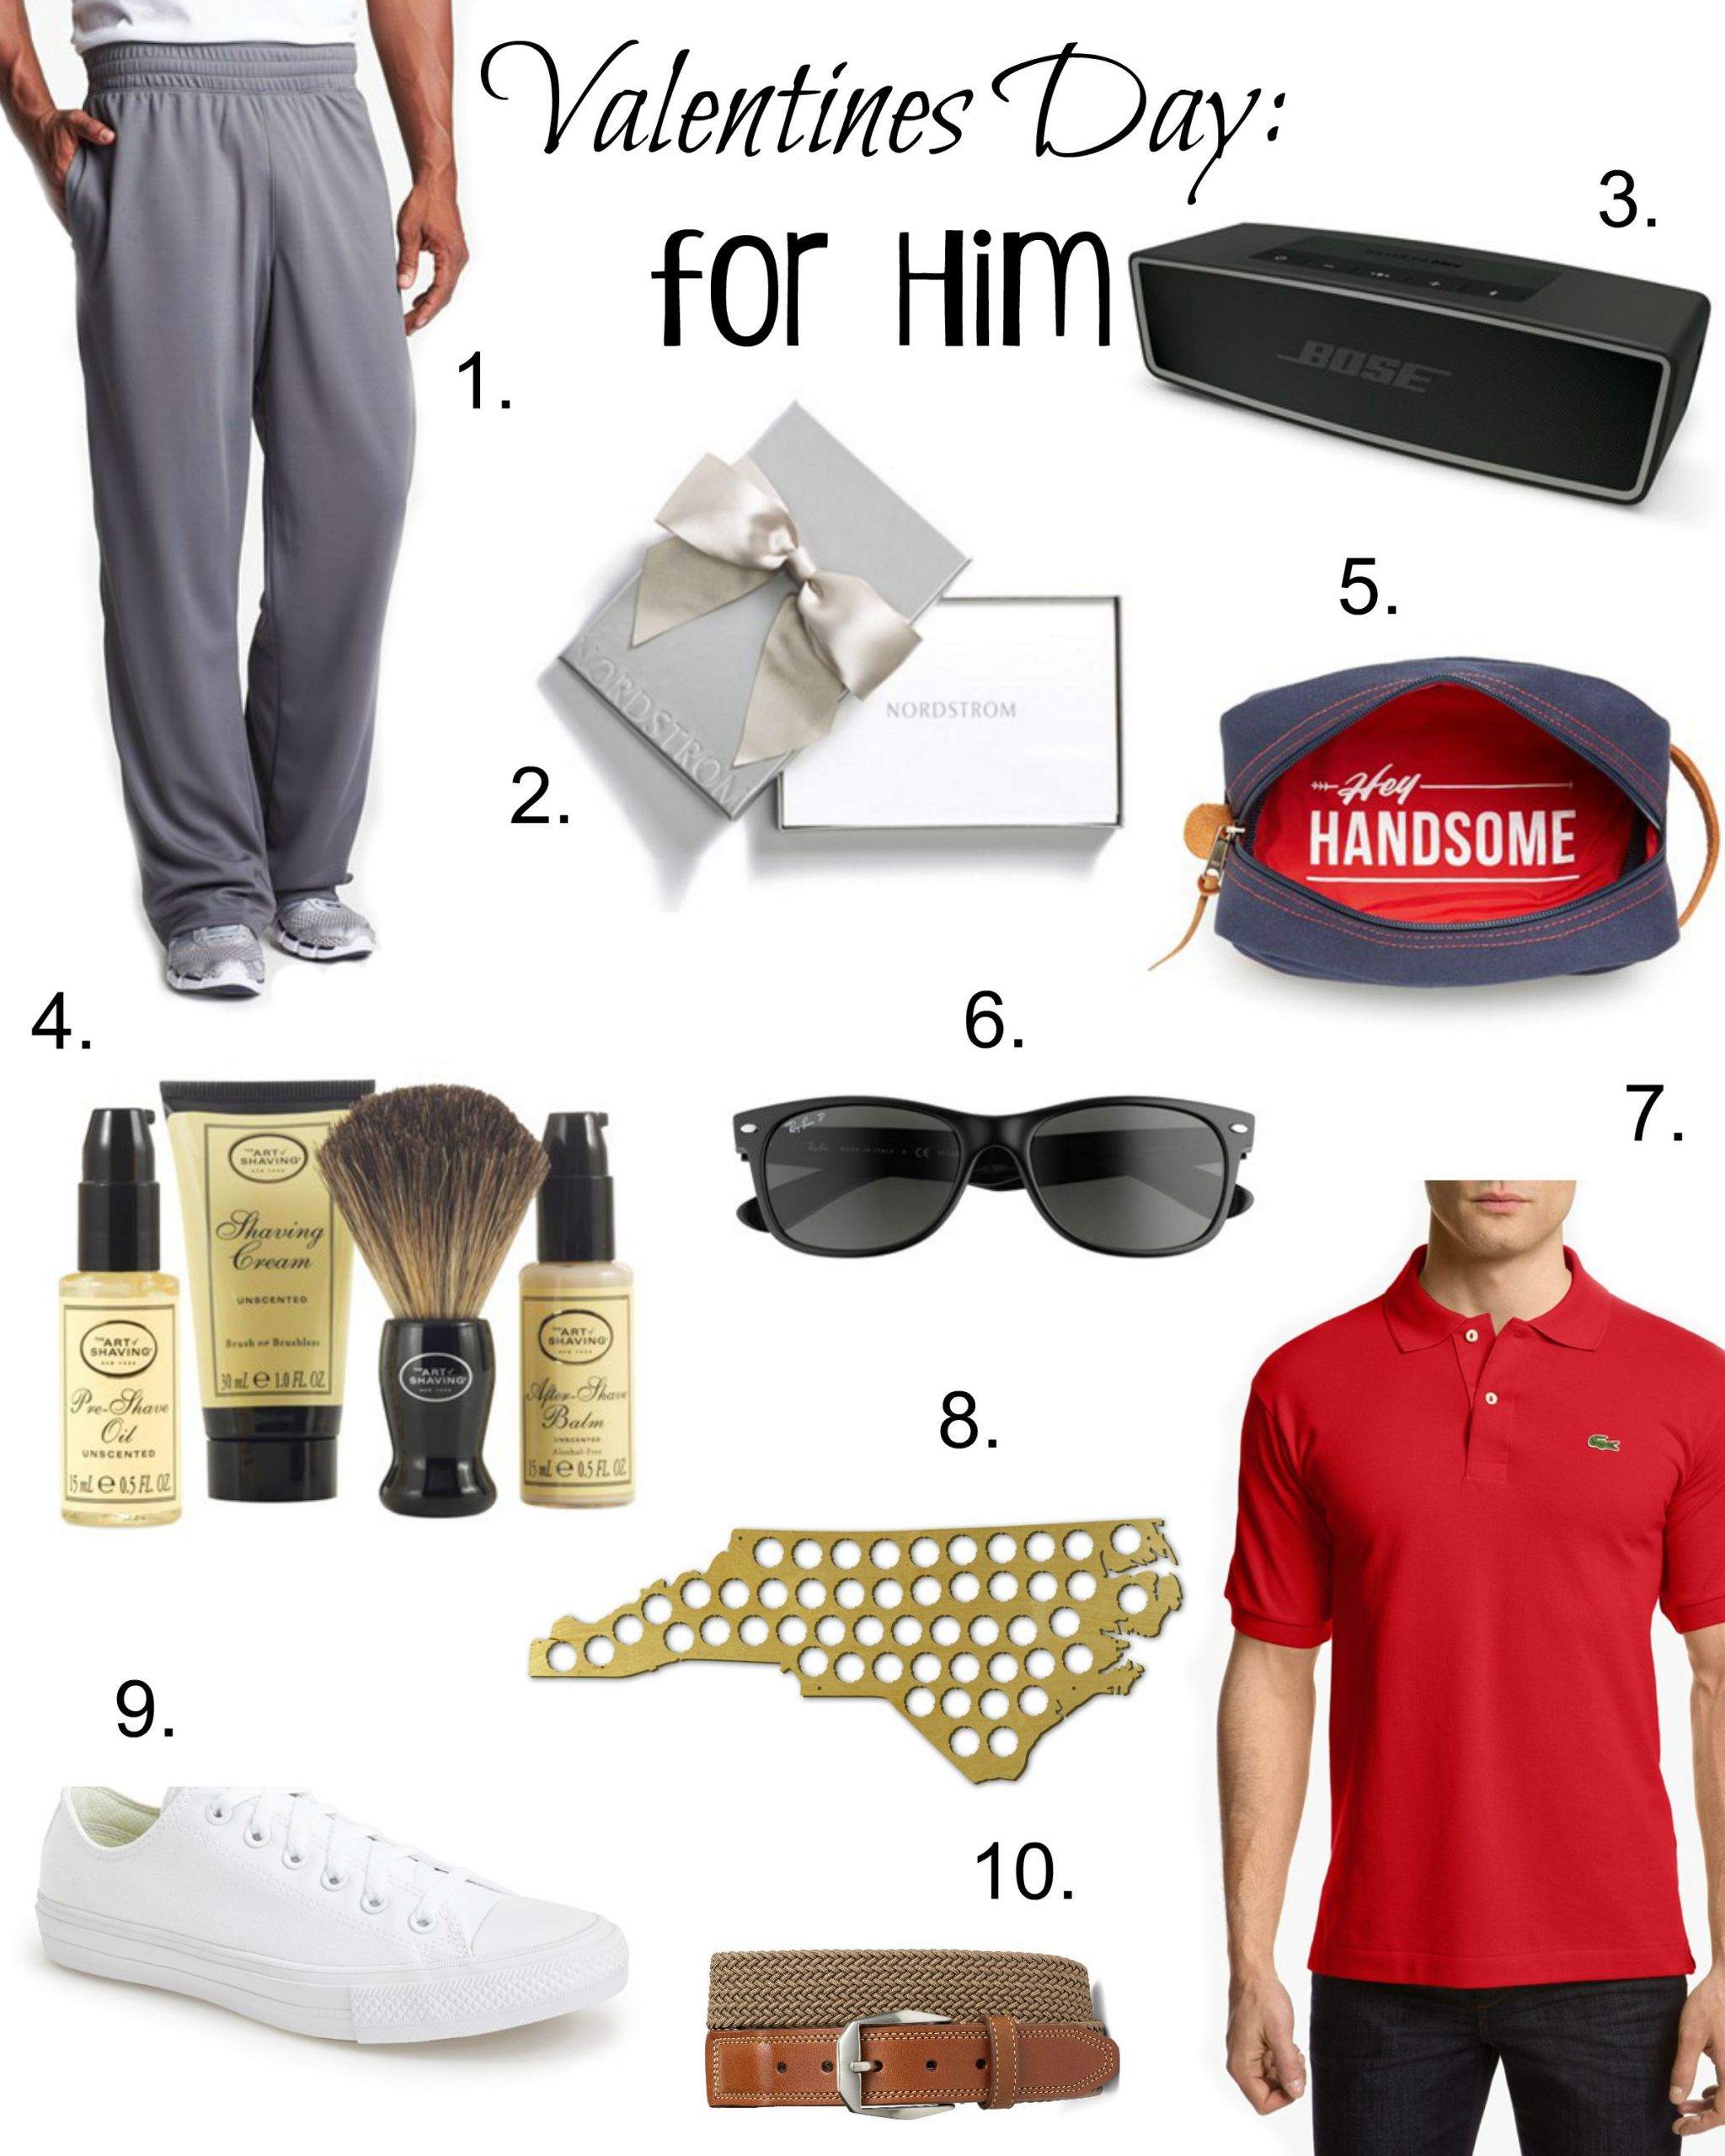 Valentines Day Gift For Him
 Top 10 Valentines Day Gifts For Him